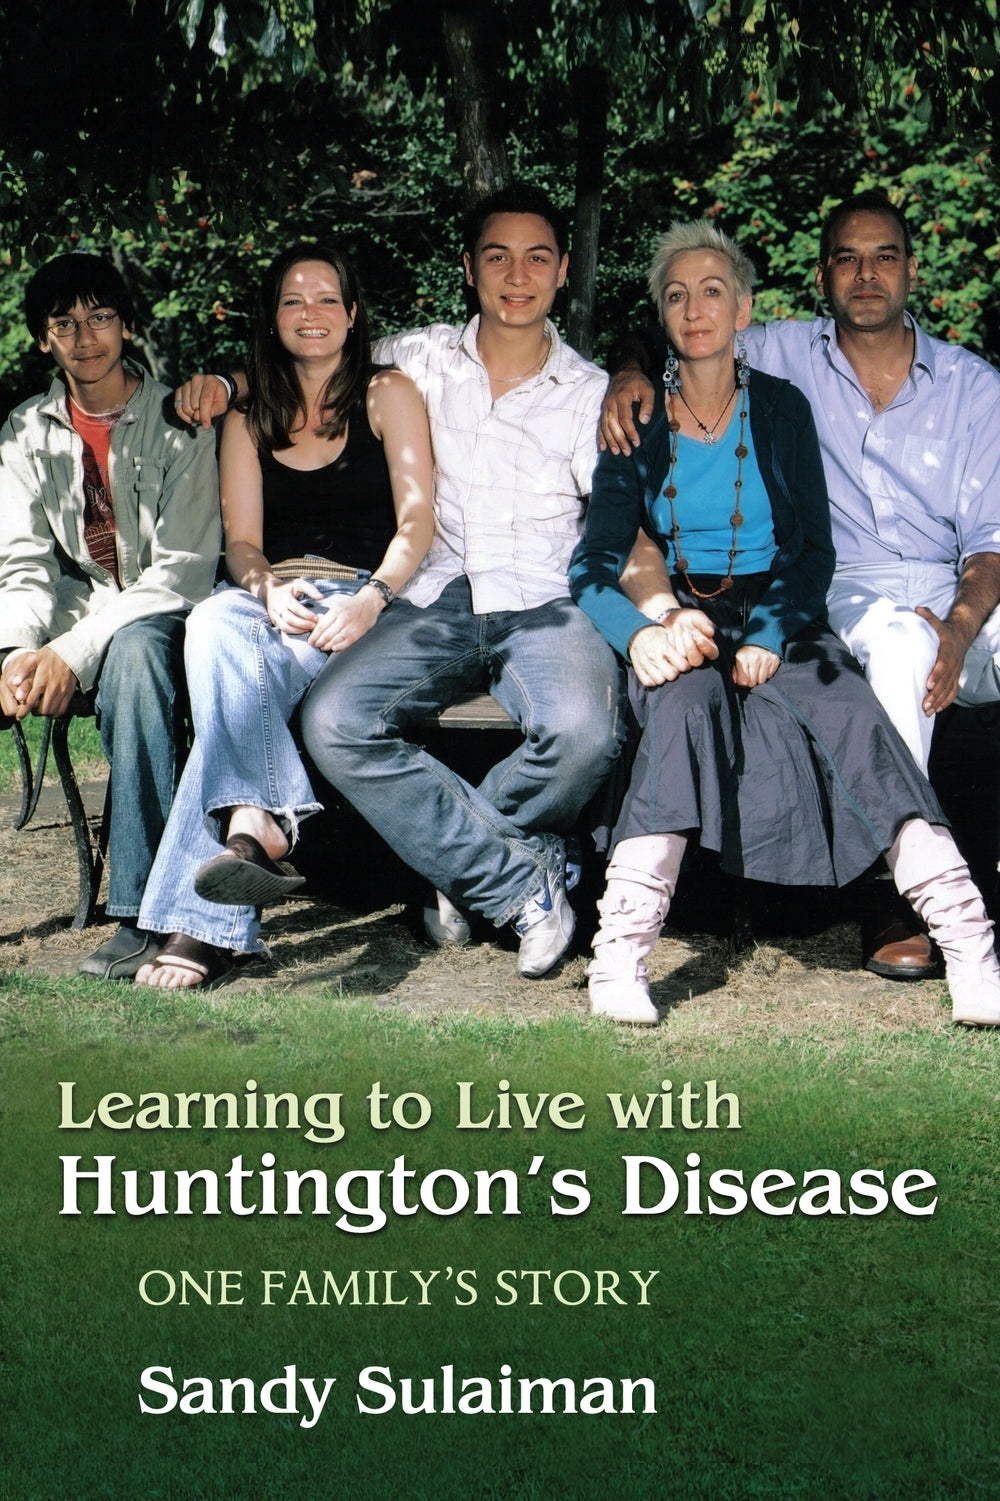 Learning to Live with Huntington's Disease by Sandy Sulaiman